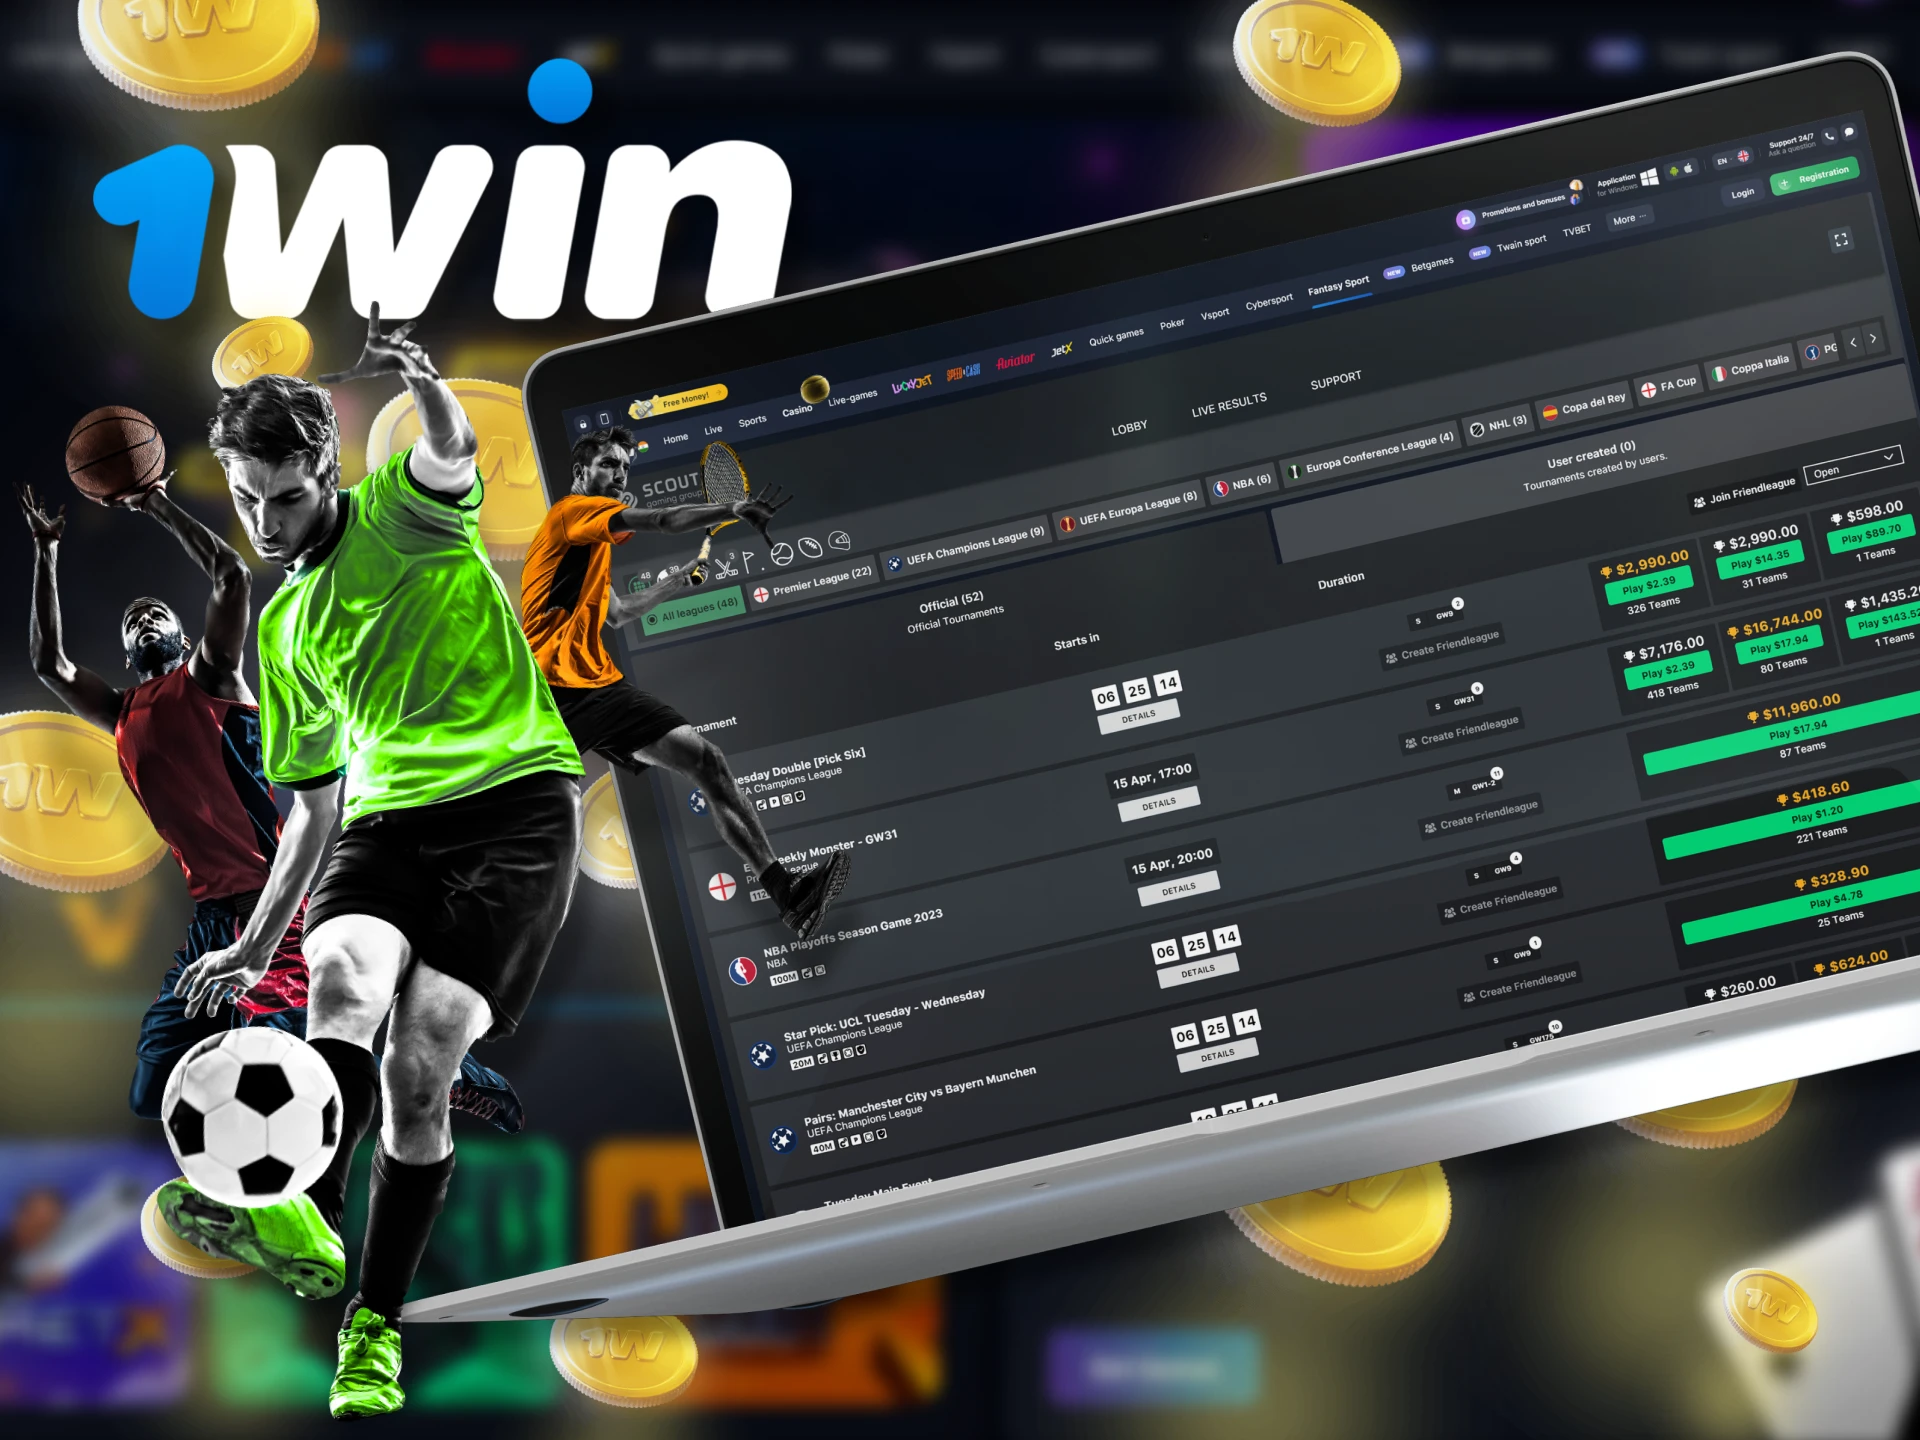 At 1Win directly on your Android phone, bet on fantasy sports.